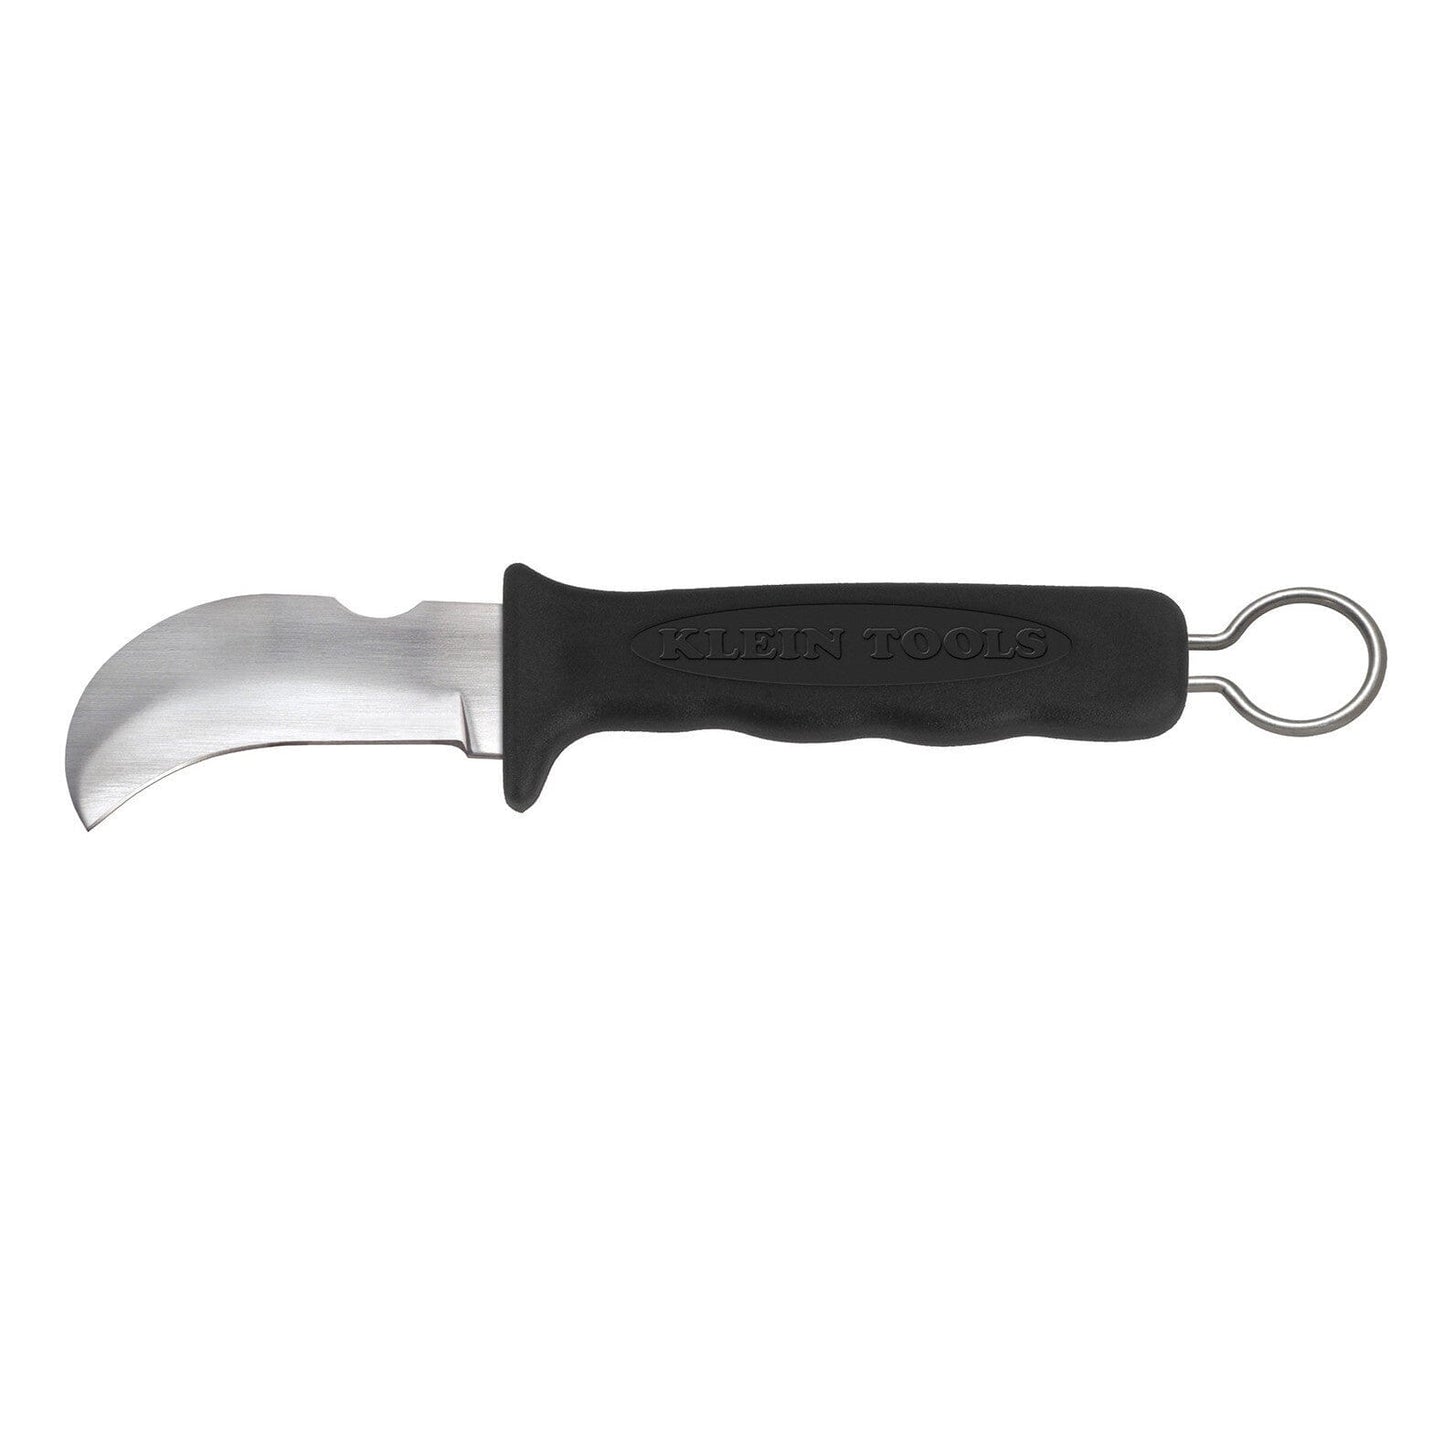 Klein Skinning Knife - Cable / Linemans Hook Blade, Notch & Ring - 1570-3 Knives Klein Tools 